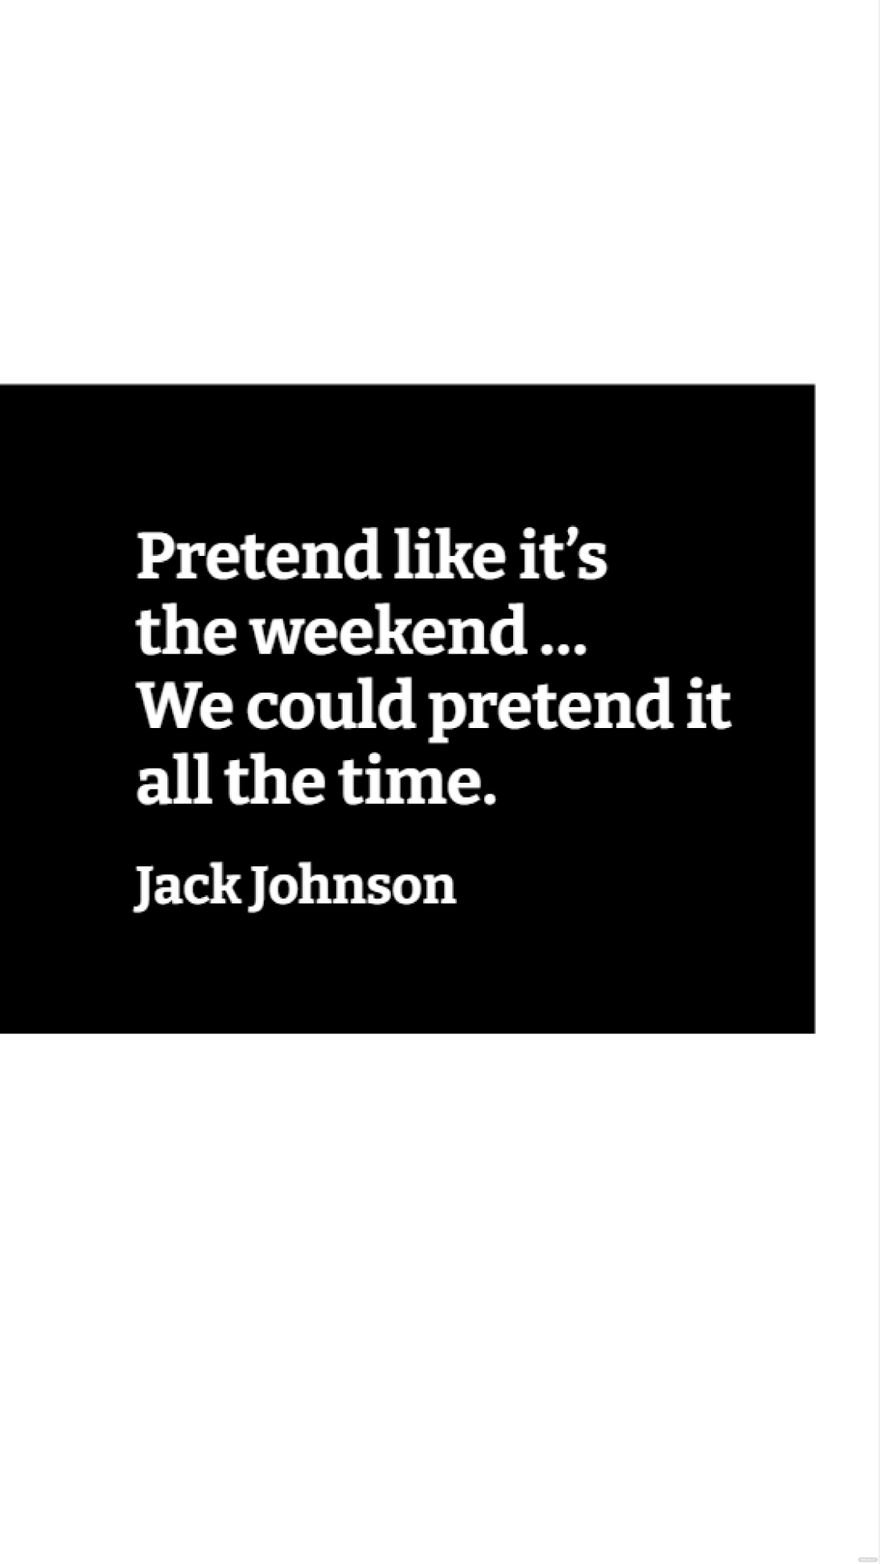 Free Jack Johnson - Pretend like it’s the weekend … We could pretend it all the time.  in JPG